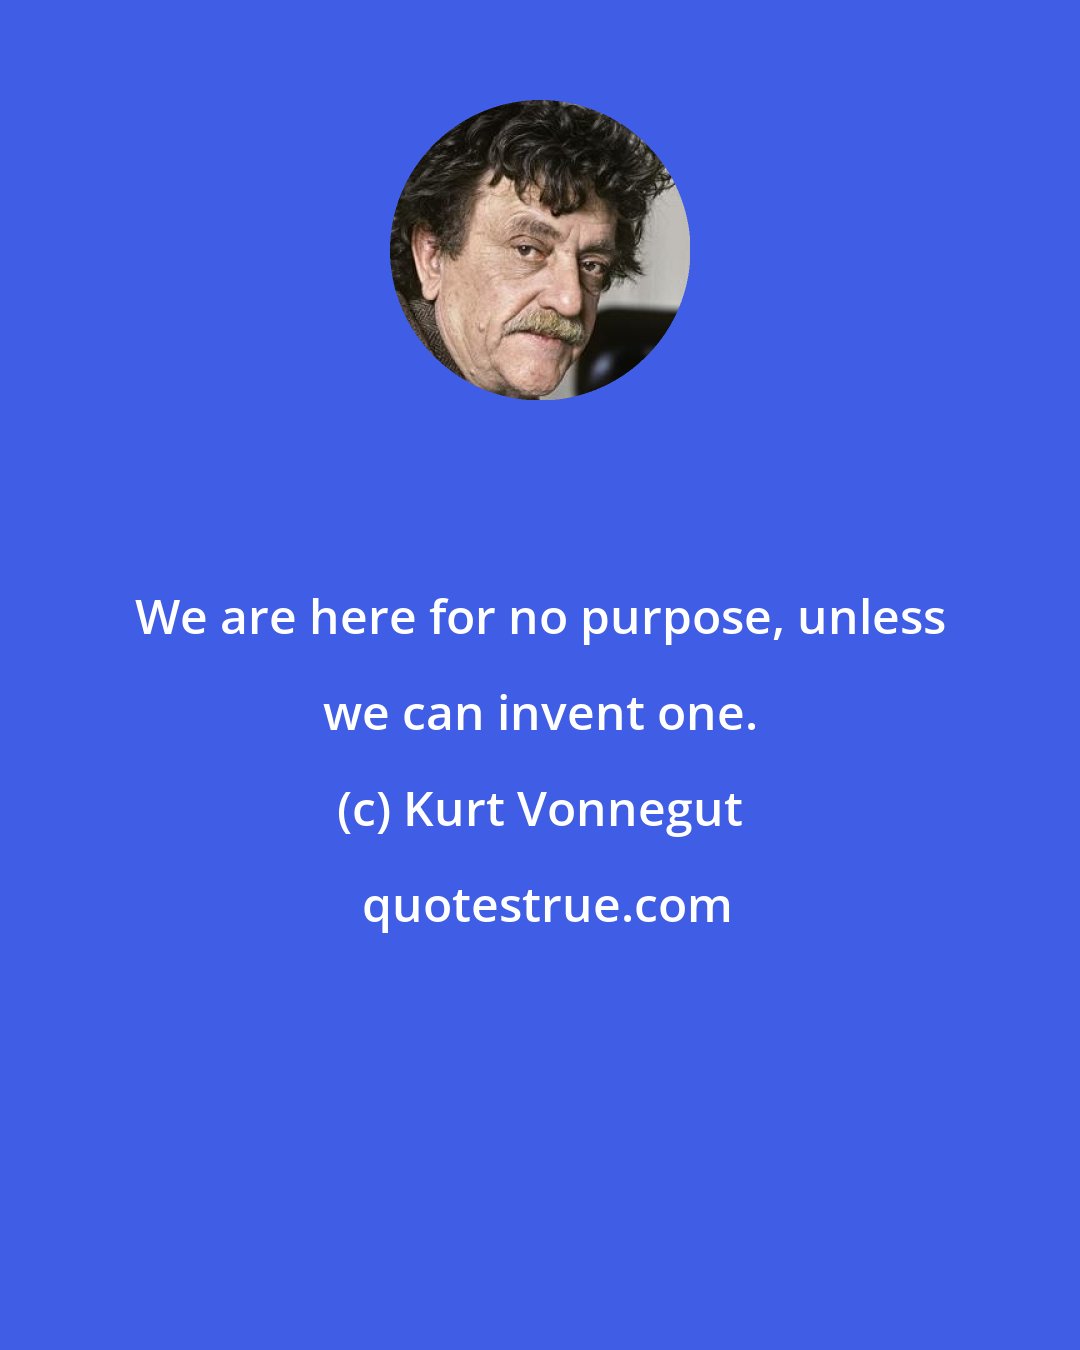 Kurt Vonnegut: We are here for no purpose, unless we can invent one.